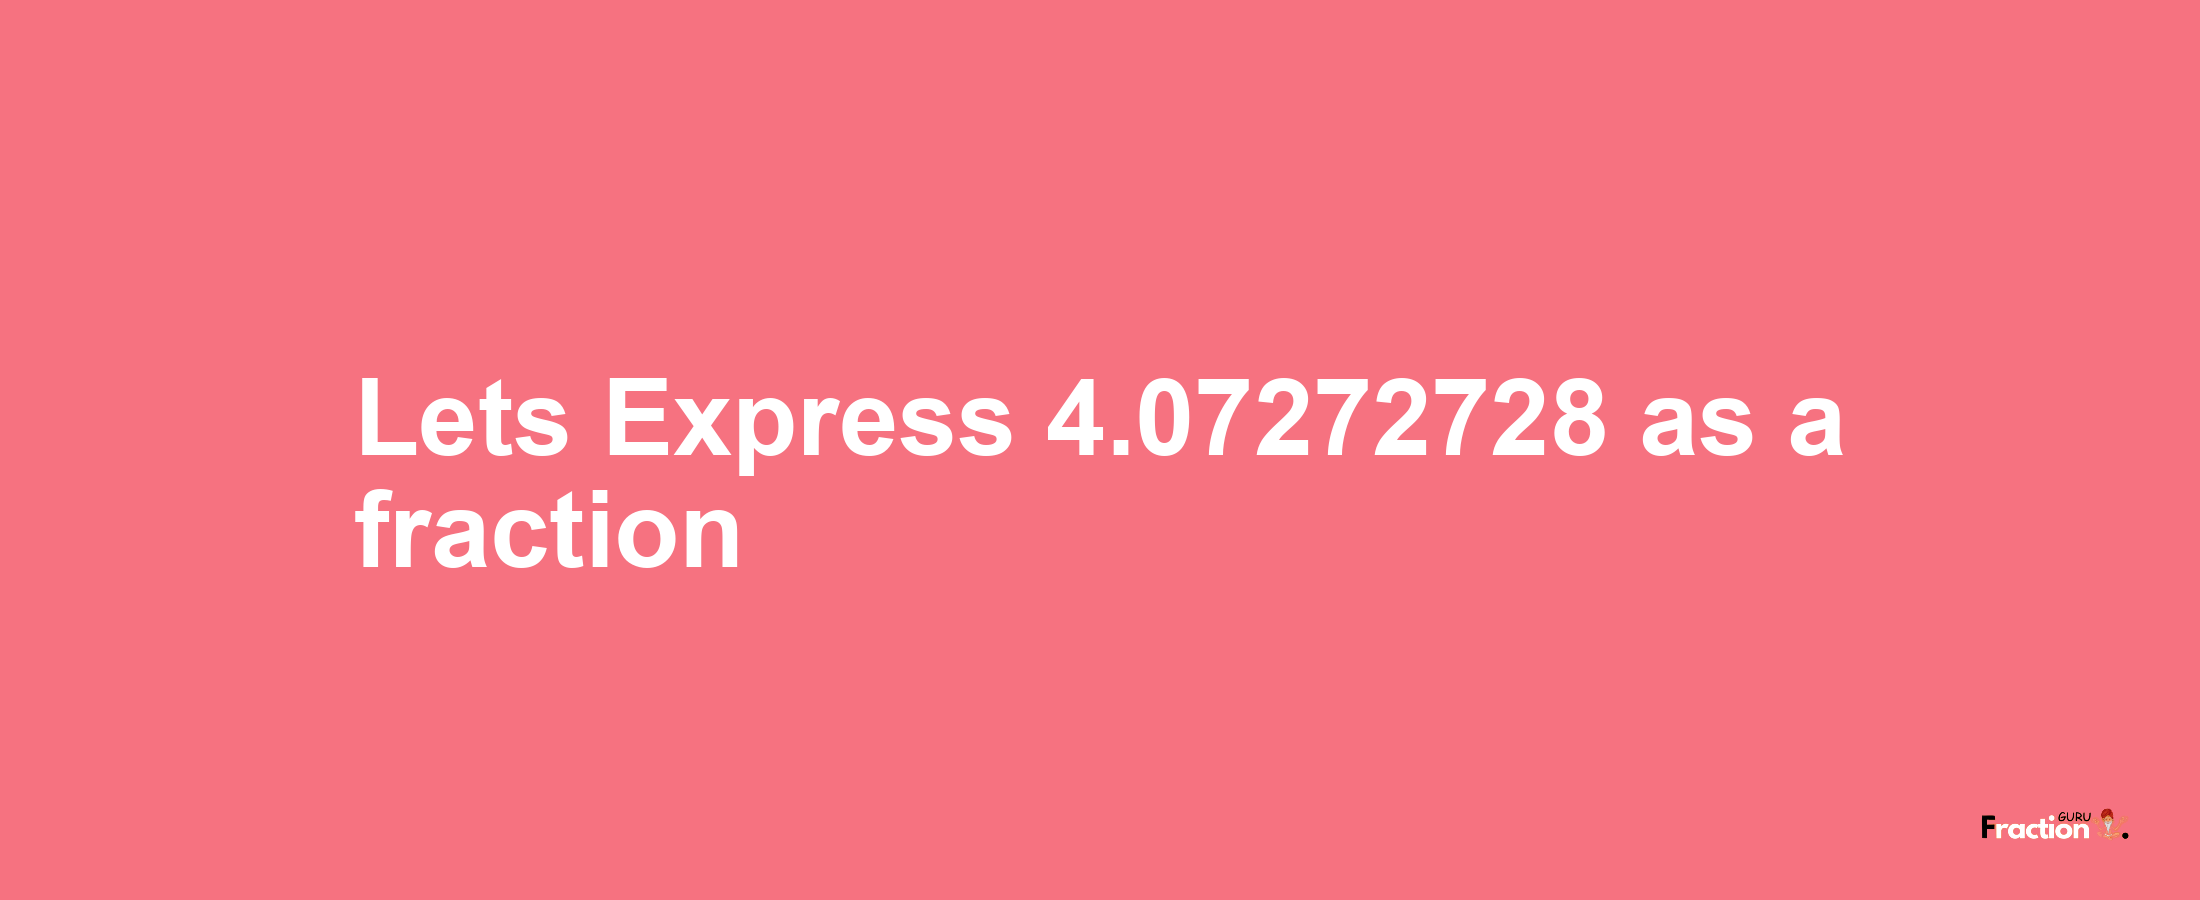 Lets Express 4.07272728 as afraction